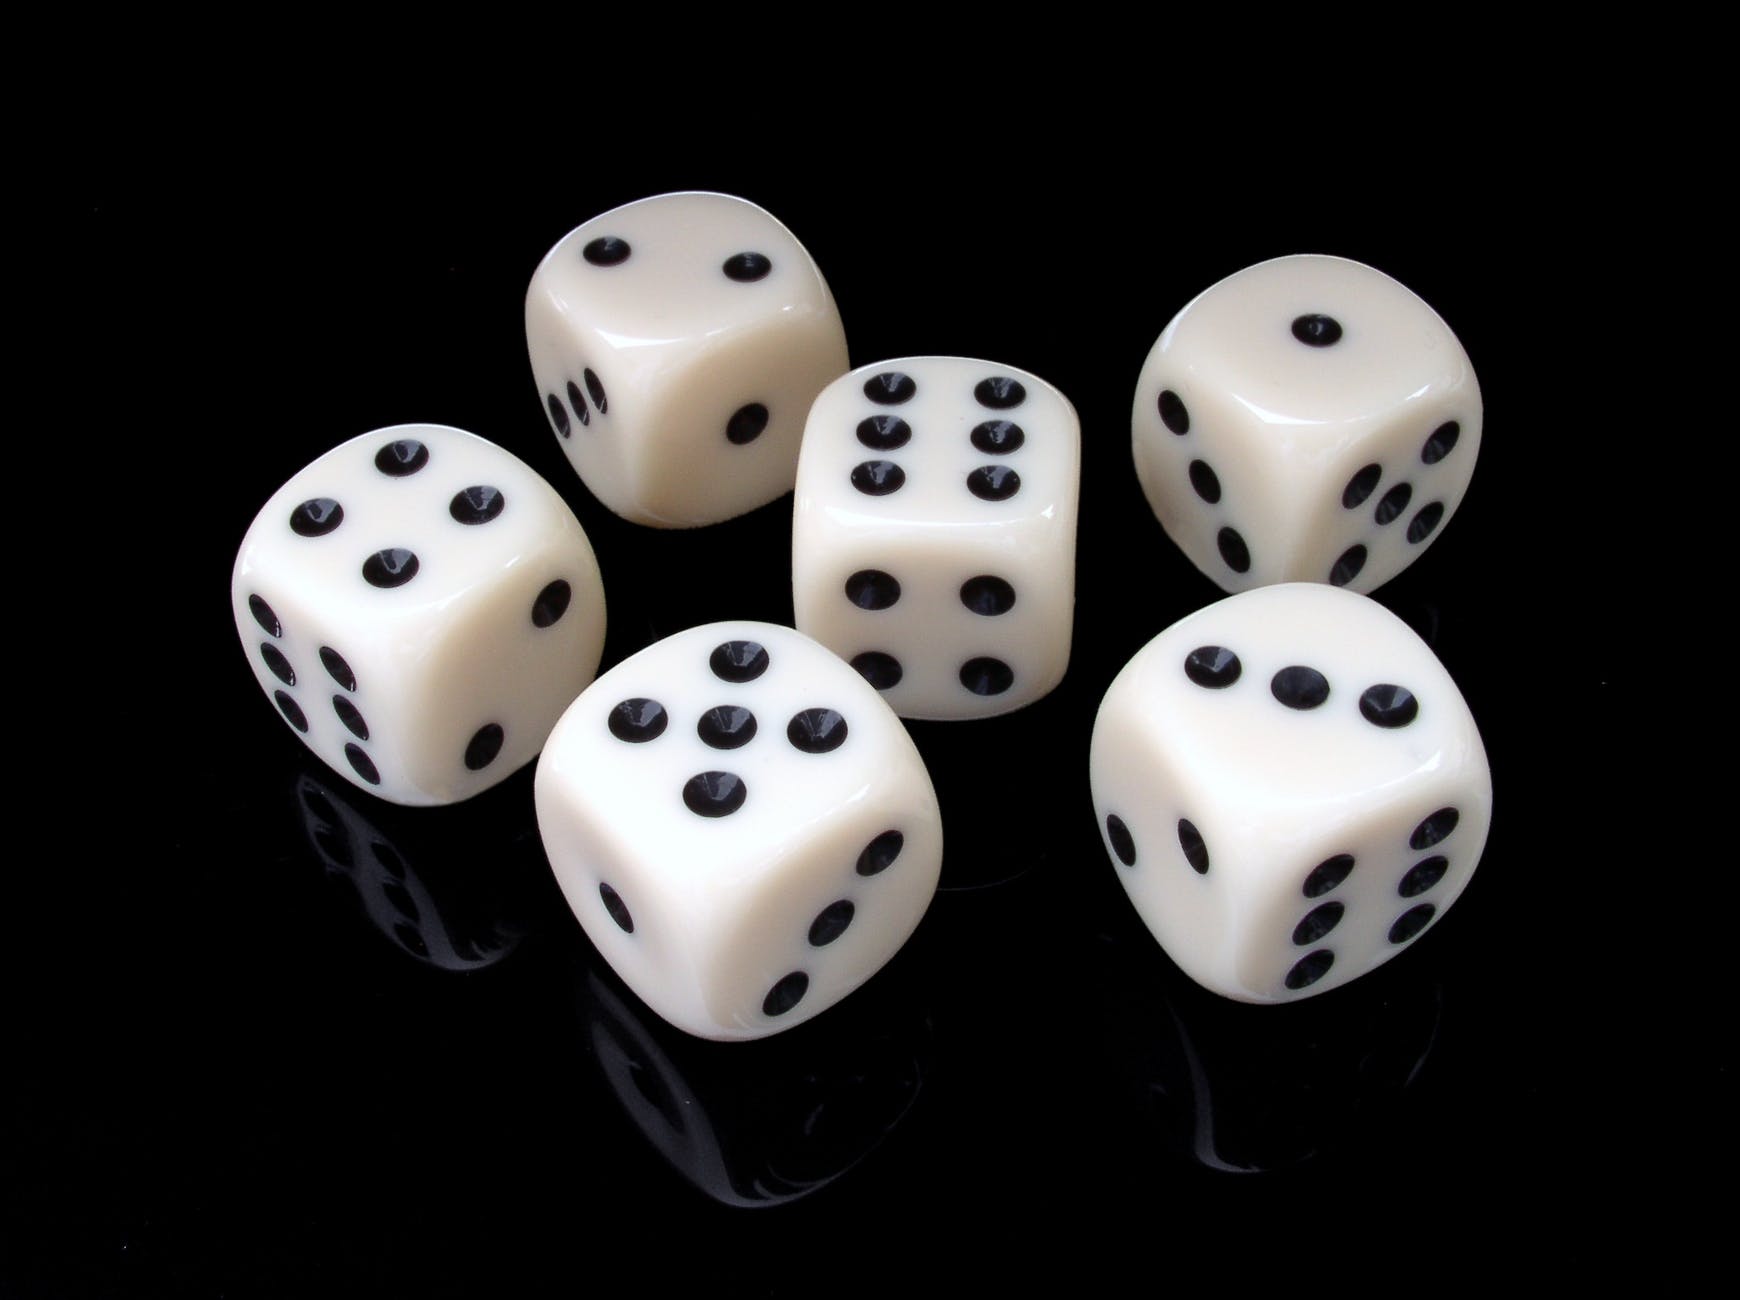 marketing should not be like rolling the dice if you want more sales